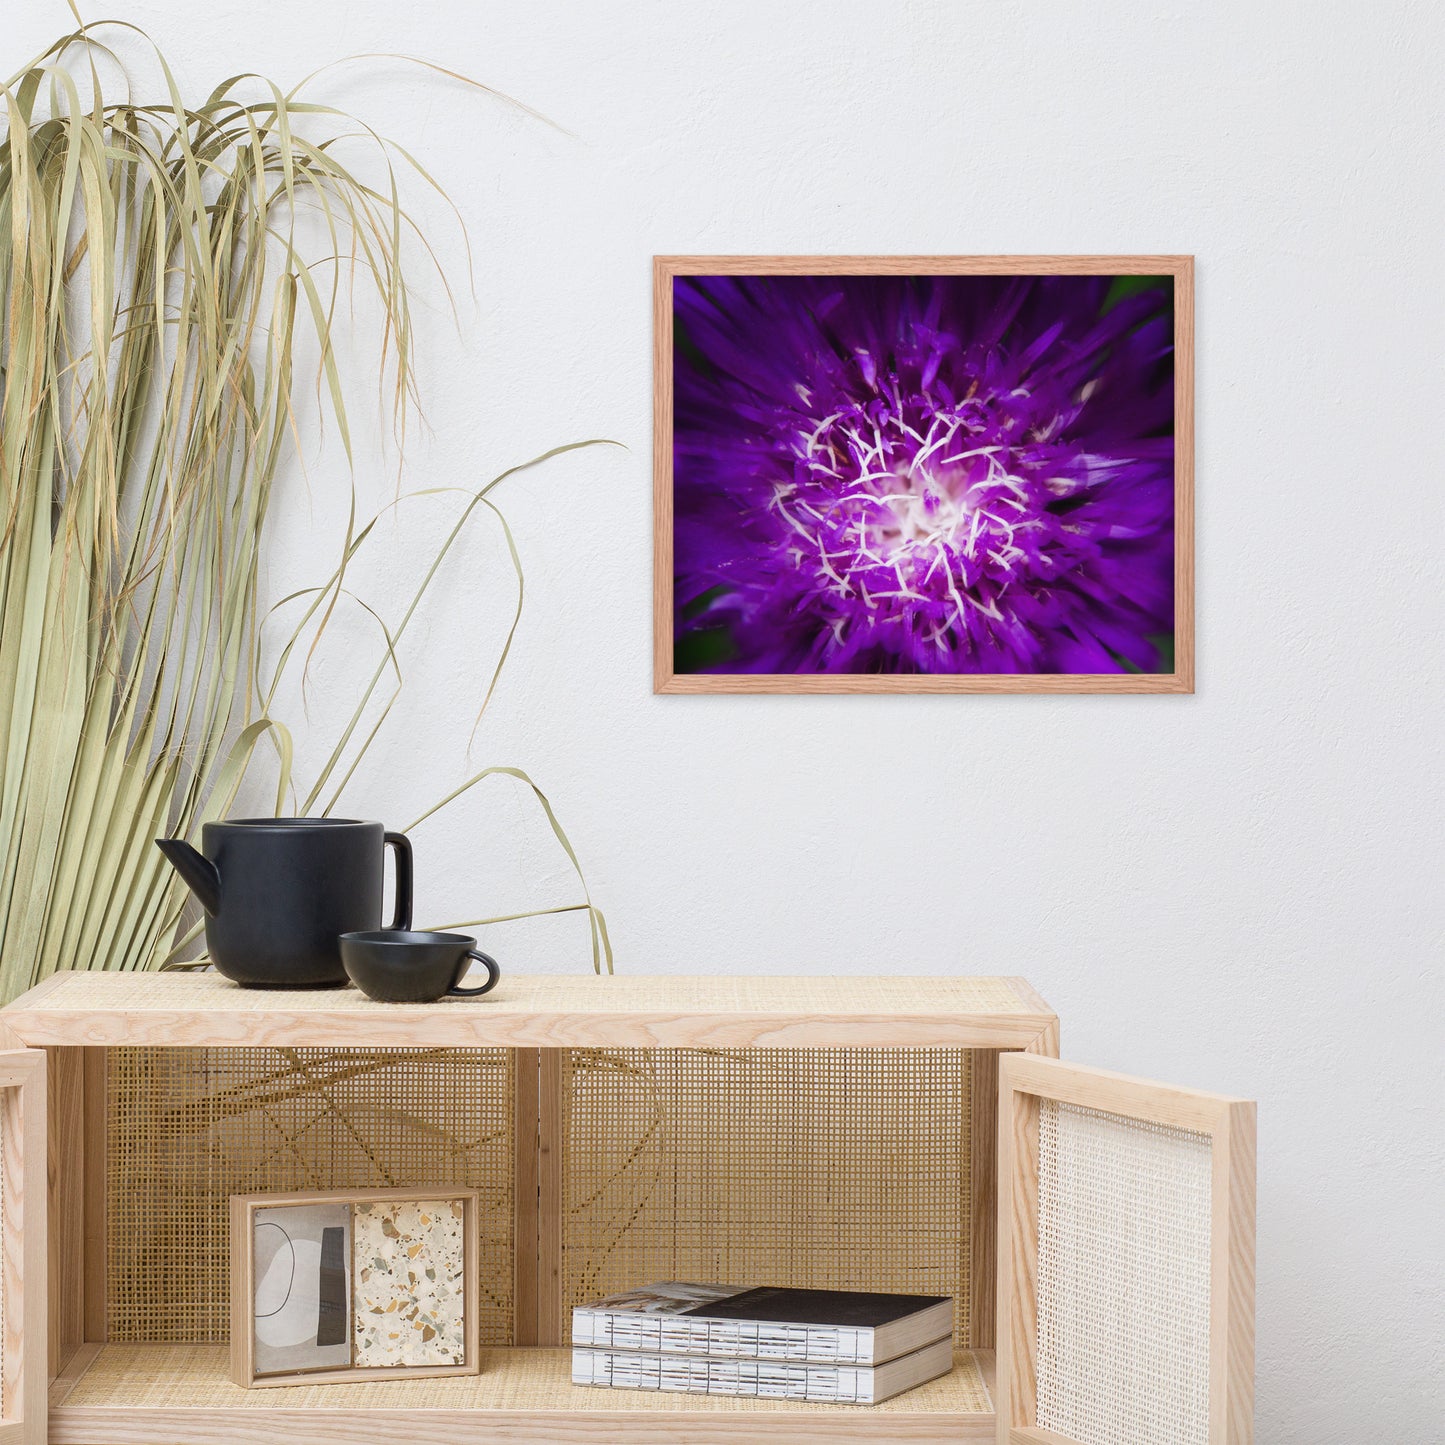 Colorful Wall Decor For Living Room: Purple Abstract Flower - Botanical / Floral / Flora / Flowers / Nature Photograph Framed Wall Art Print - Artwork - Wall Decor